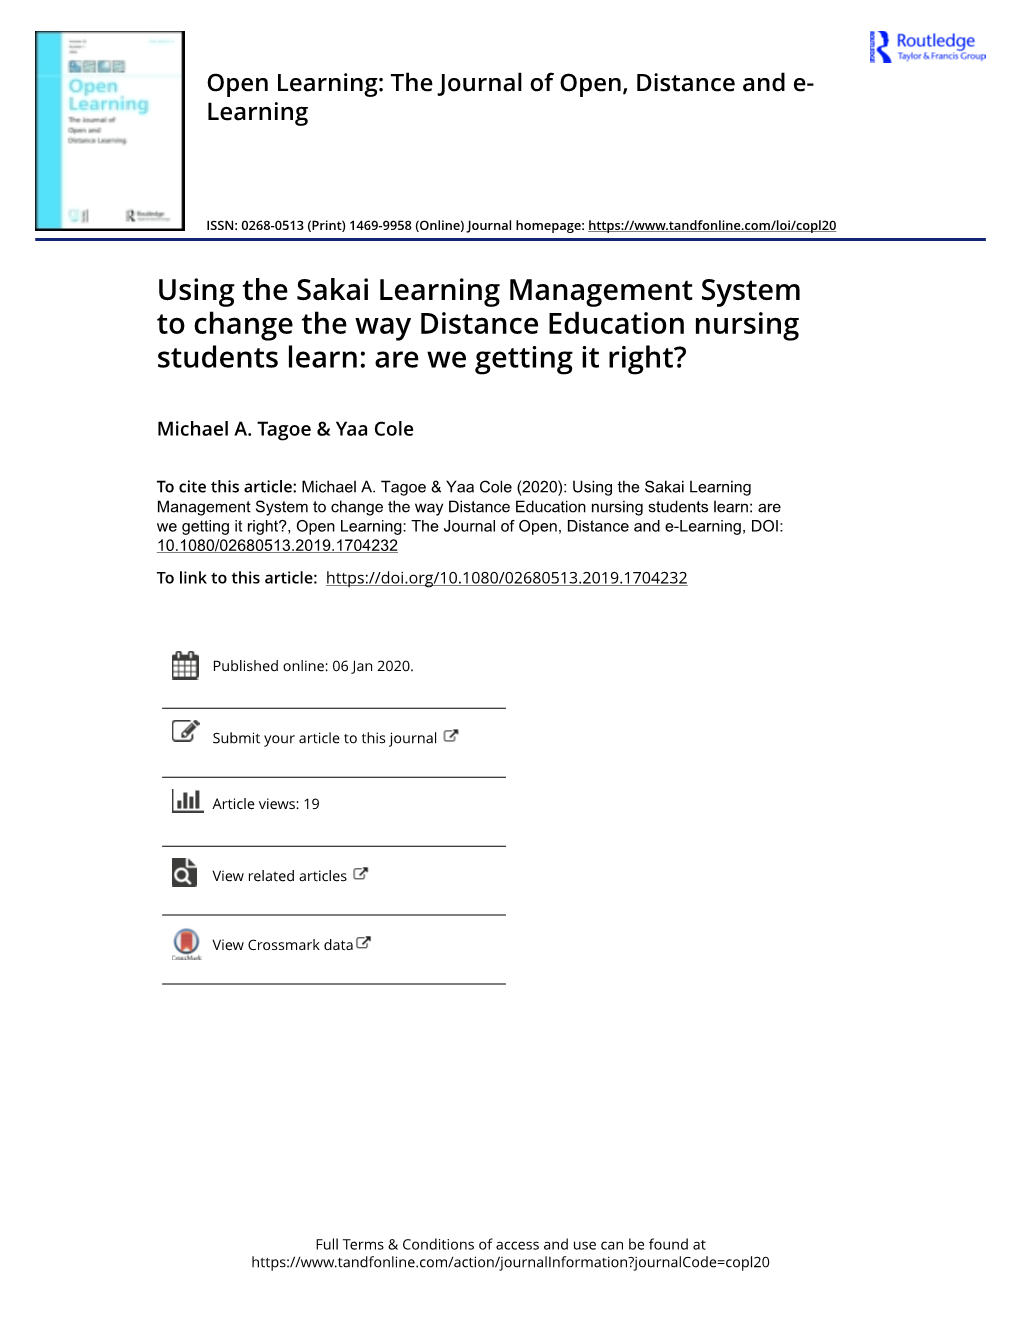 Using the Sakai Learning Management System to Change the Way Distance Education Nursing Students Learn: Are We Getting It Right?